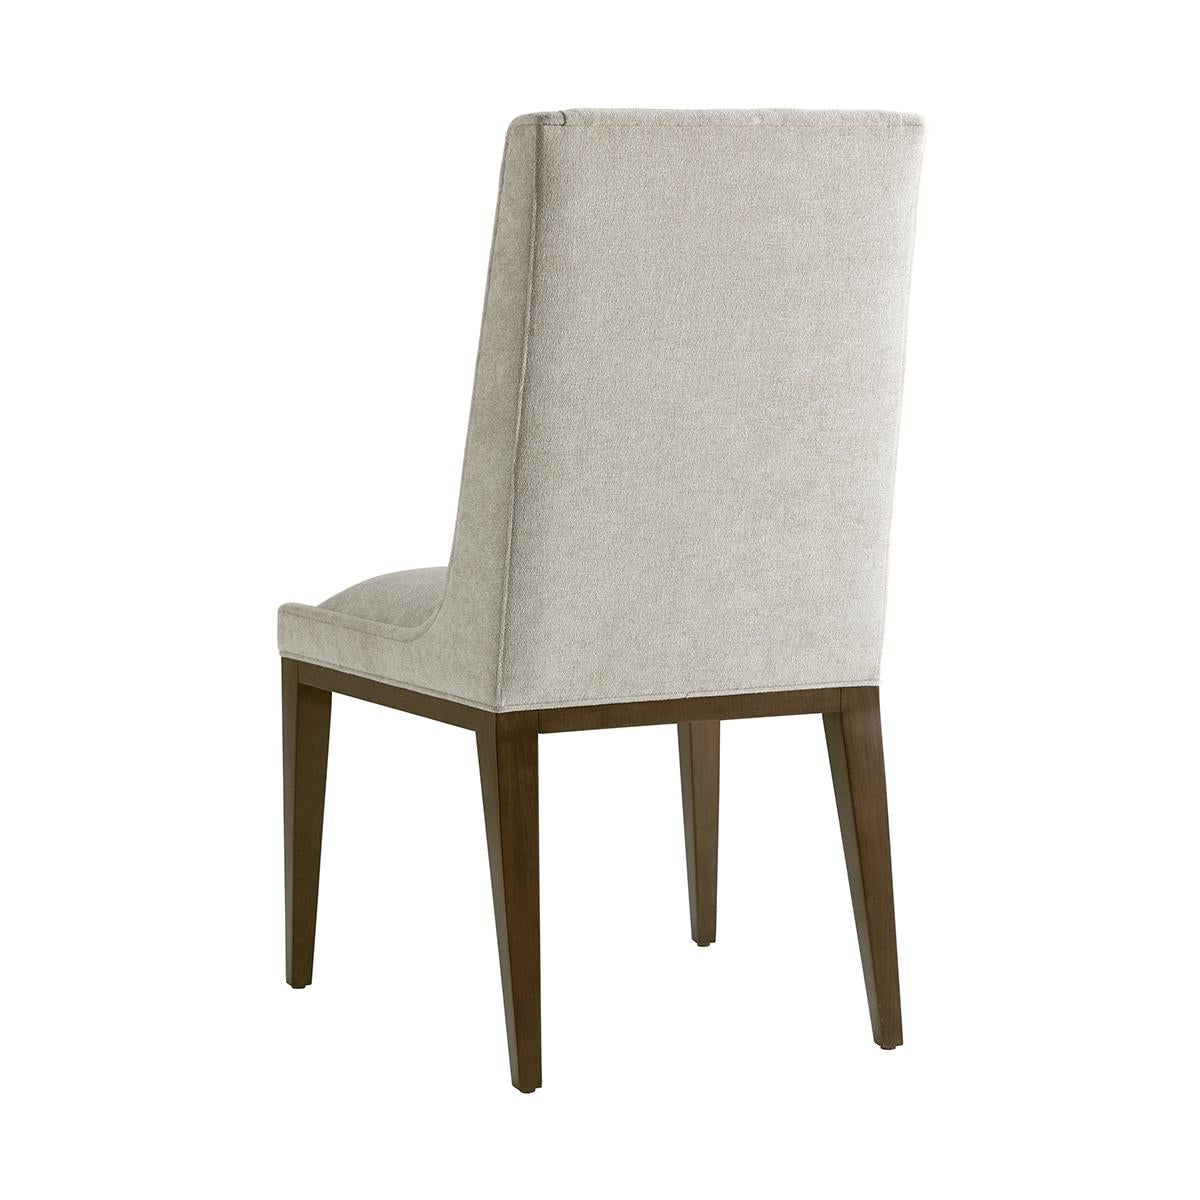 Mid-Century Modern Midcentury Upholstered Dining Chair For Sale